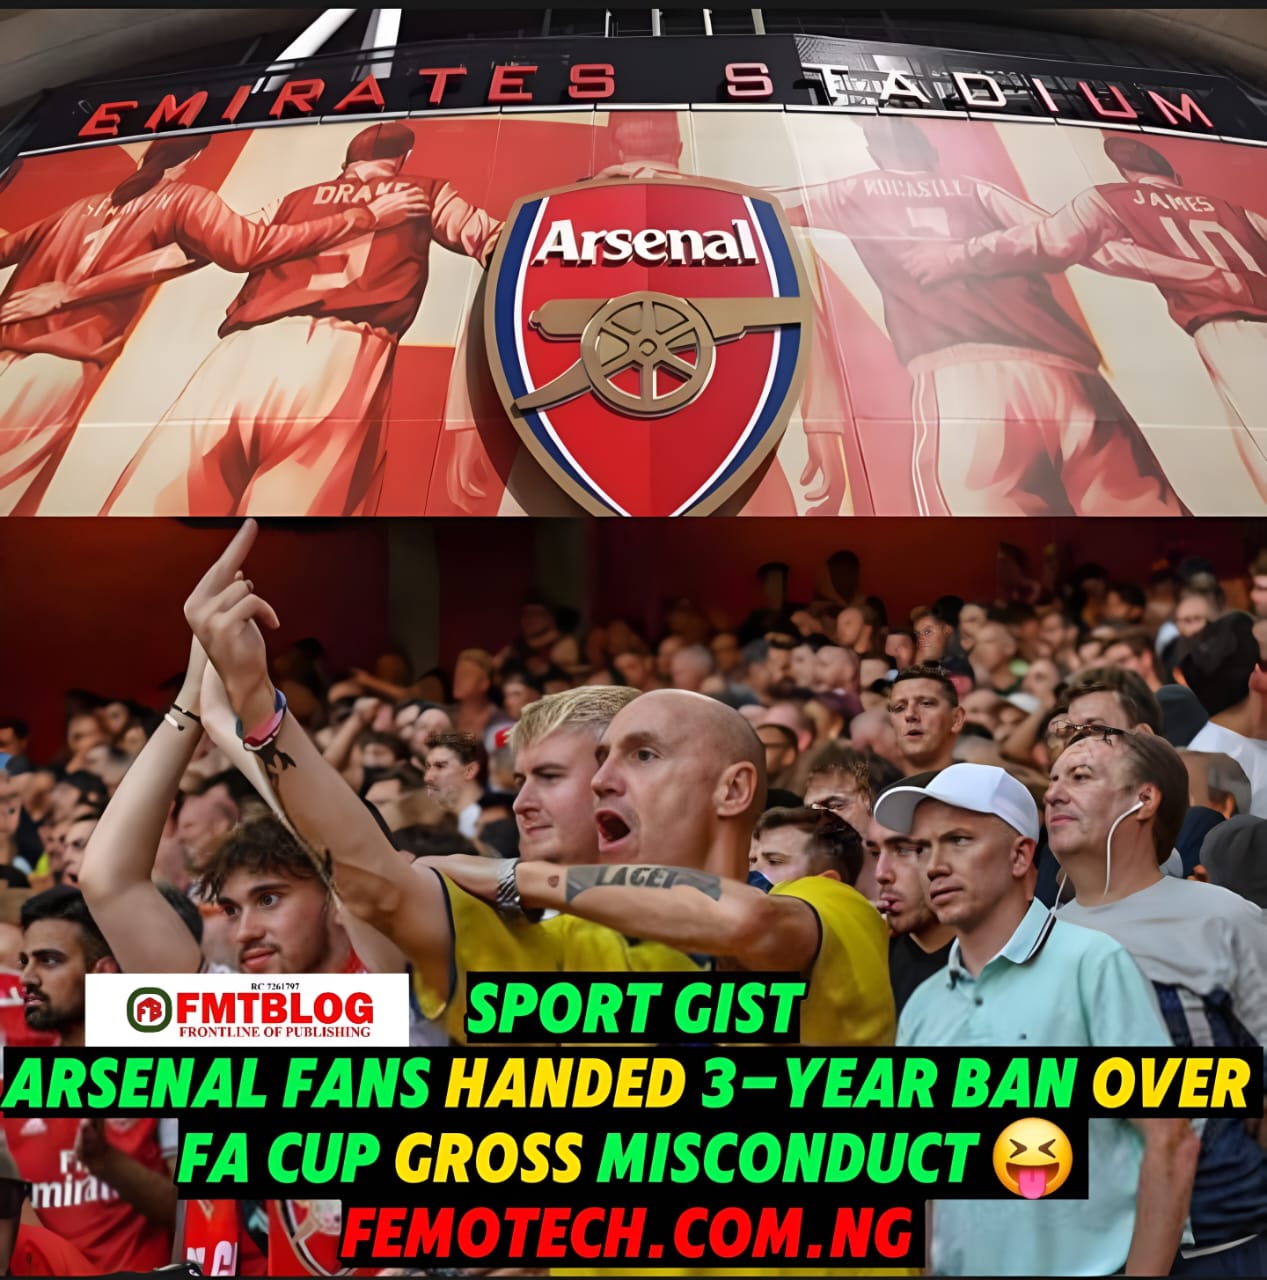 Arsenal Fans Handed 3-Year Ban Over FA Cup Gross Misconduct